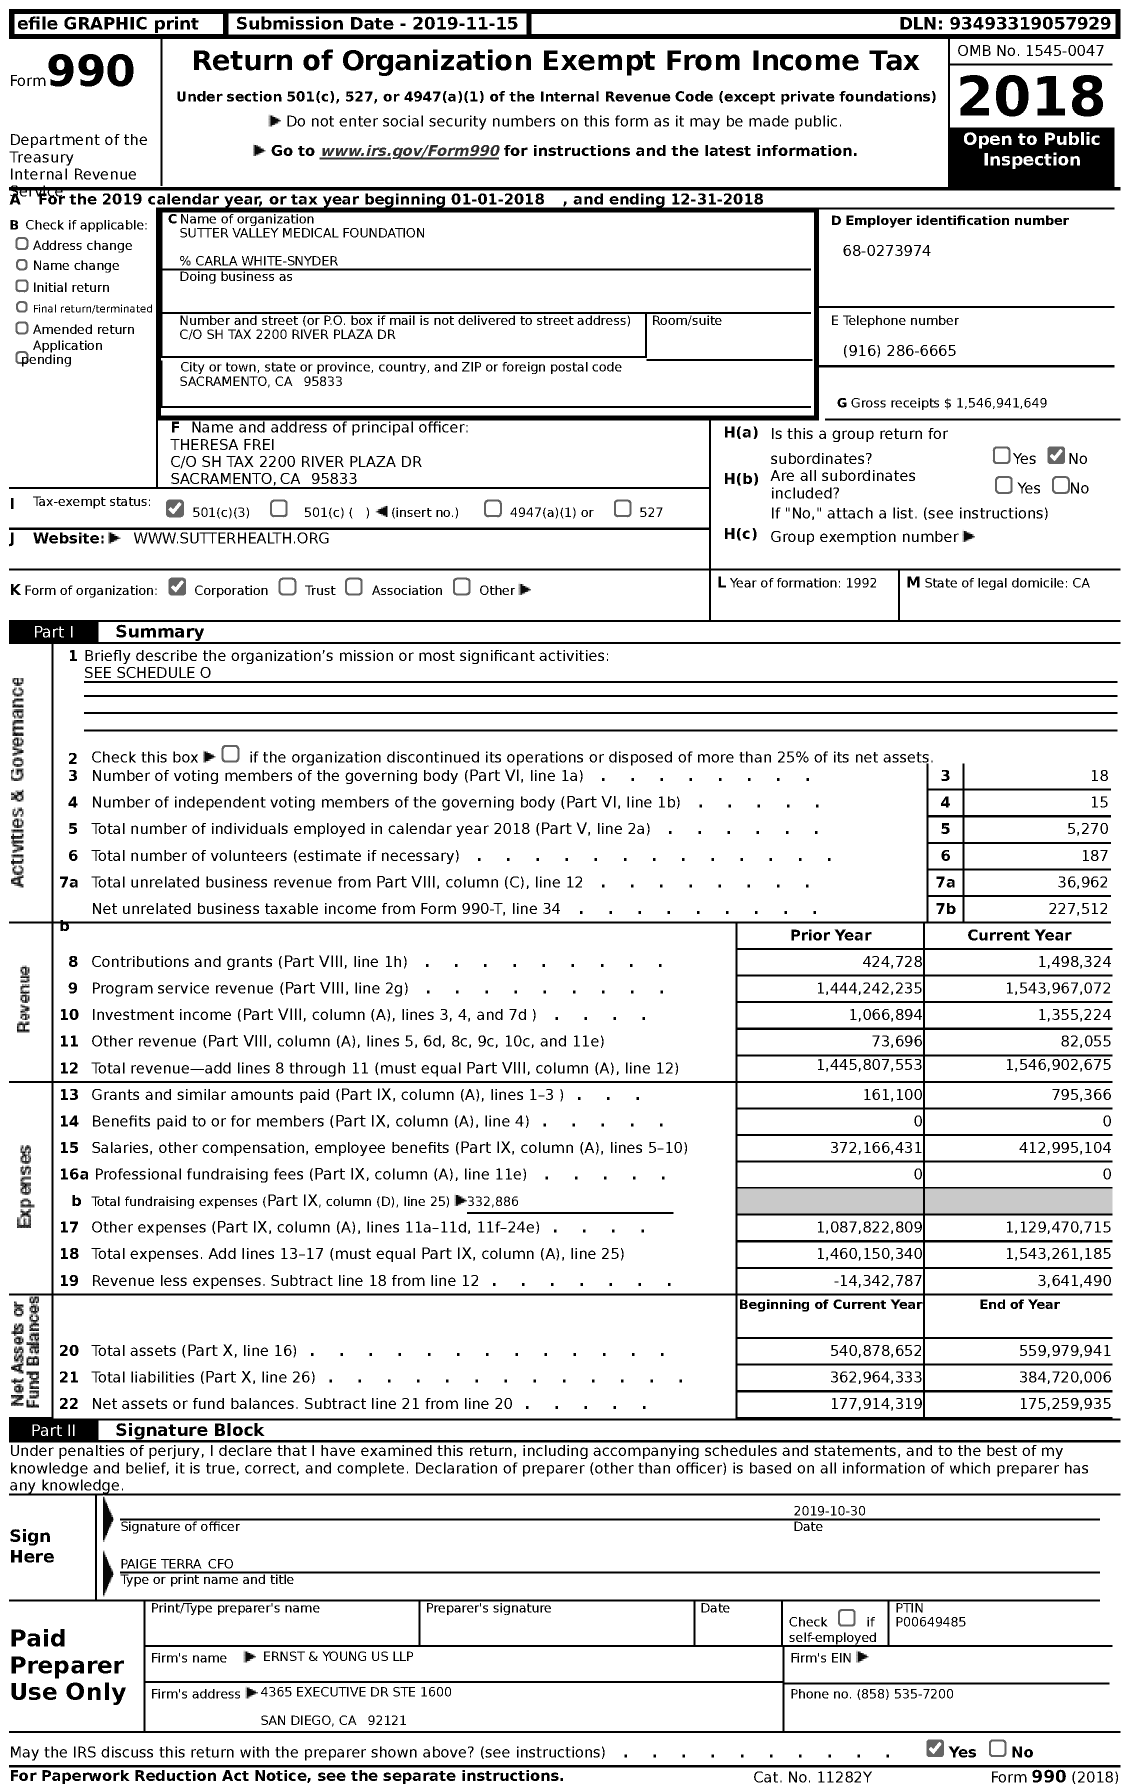 Image of first page of 2018 Form 990 for Sutter Medical Foundation (SMF)